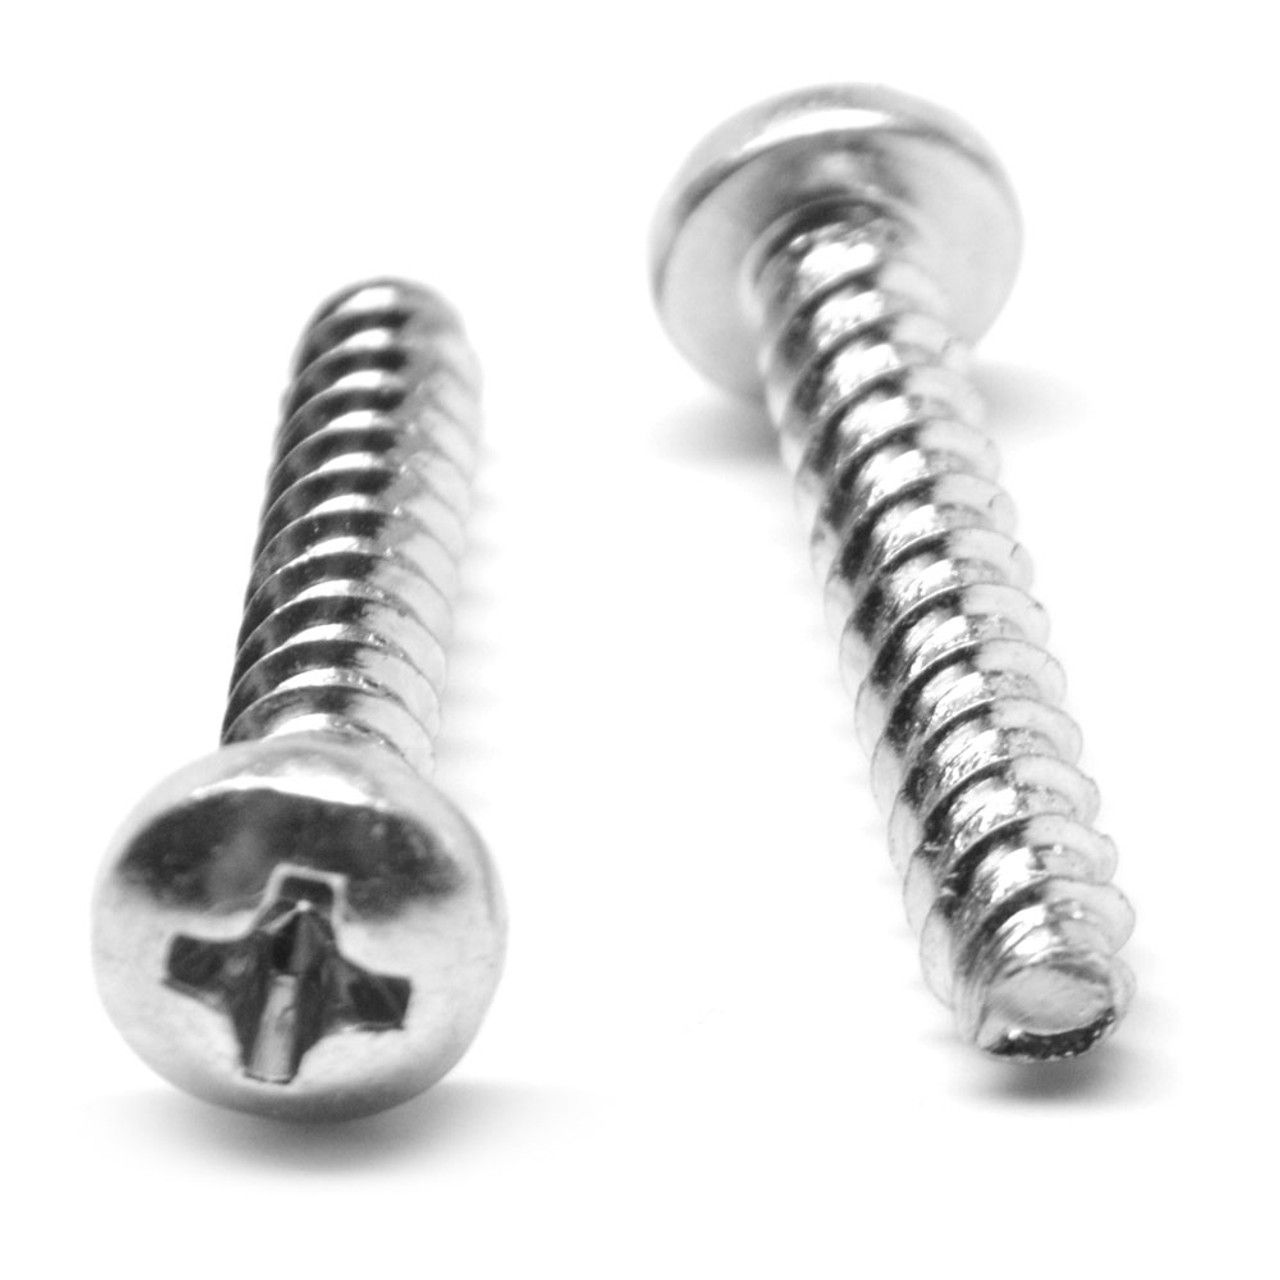 M2.5 x 1.12 x 6 MM EJOT PT-Alternative Phillips Pan Head Thread Forming Screw Stainless Steel 18-8